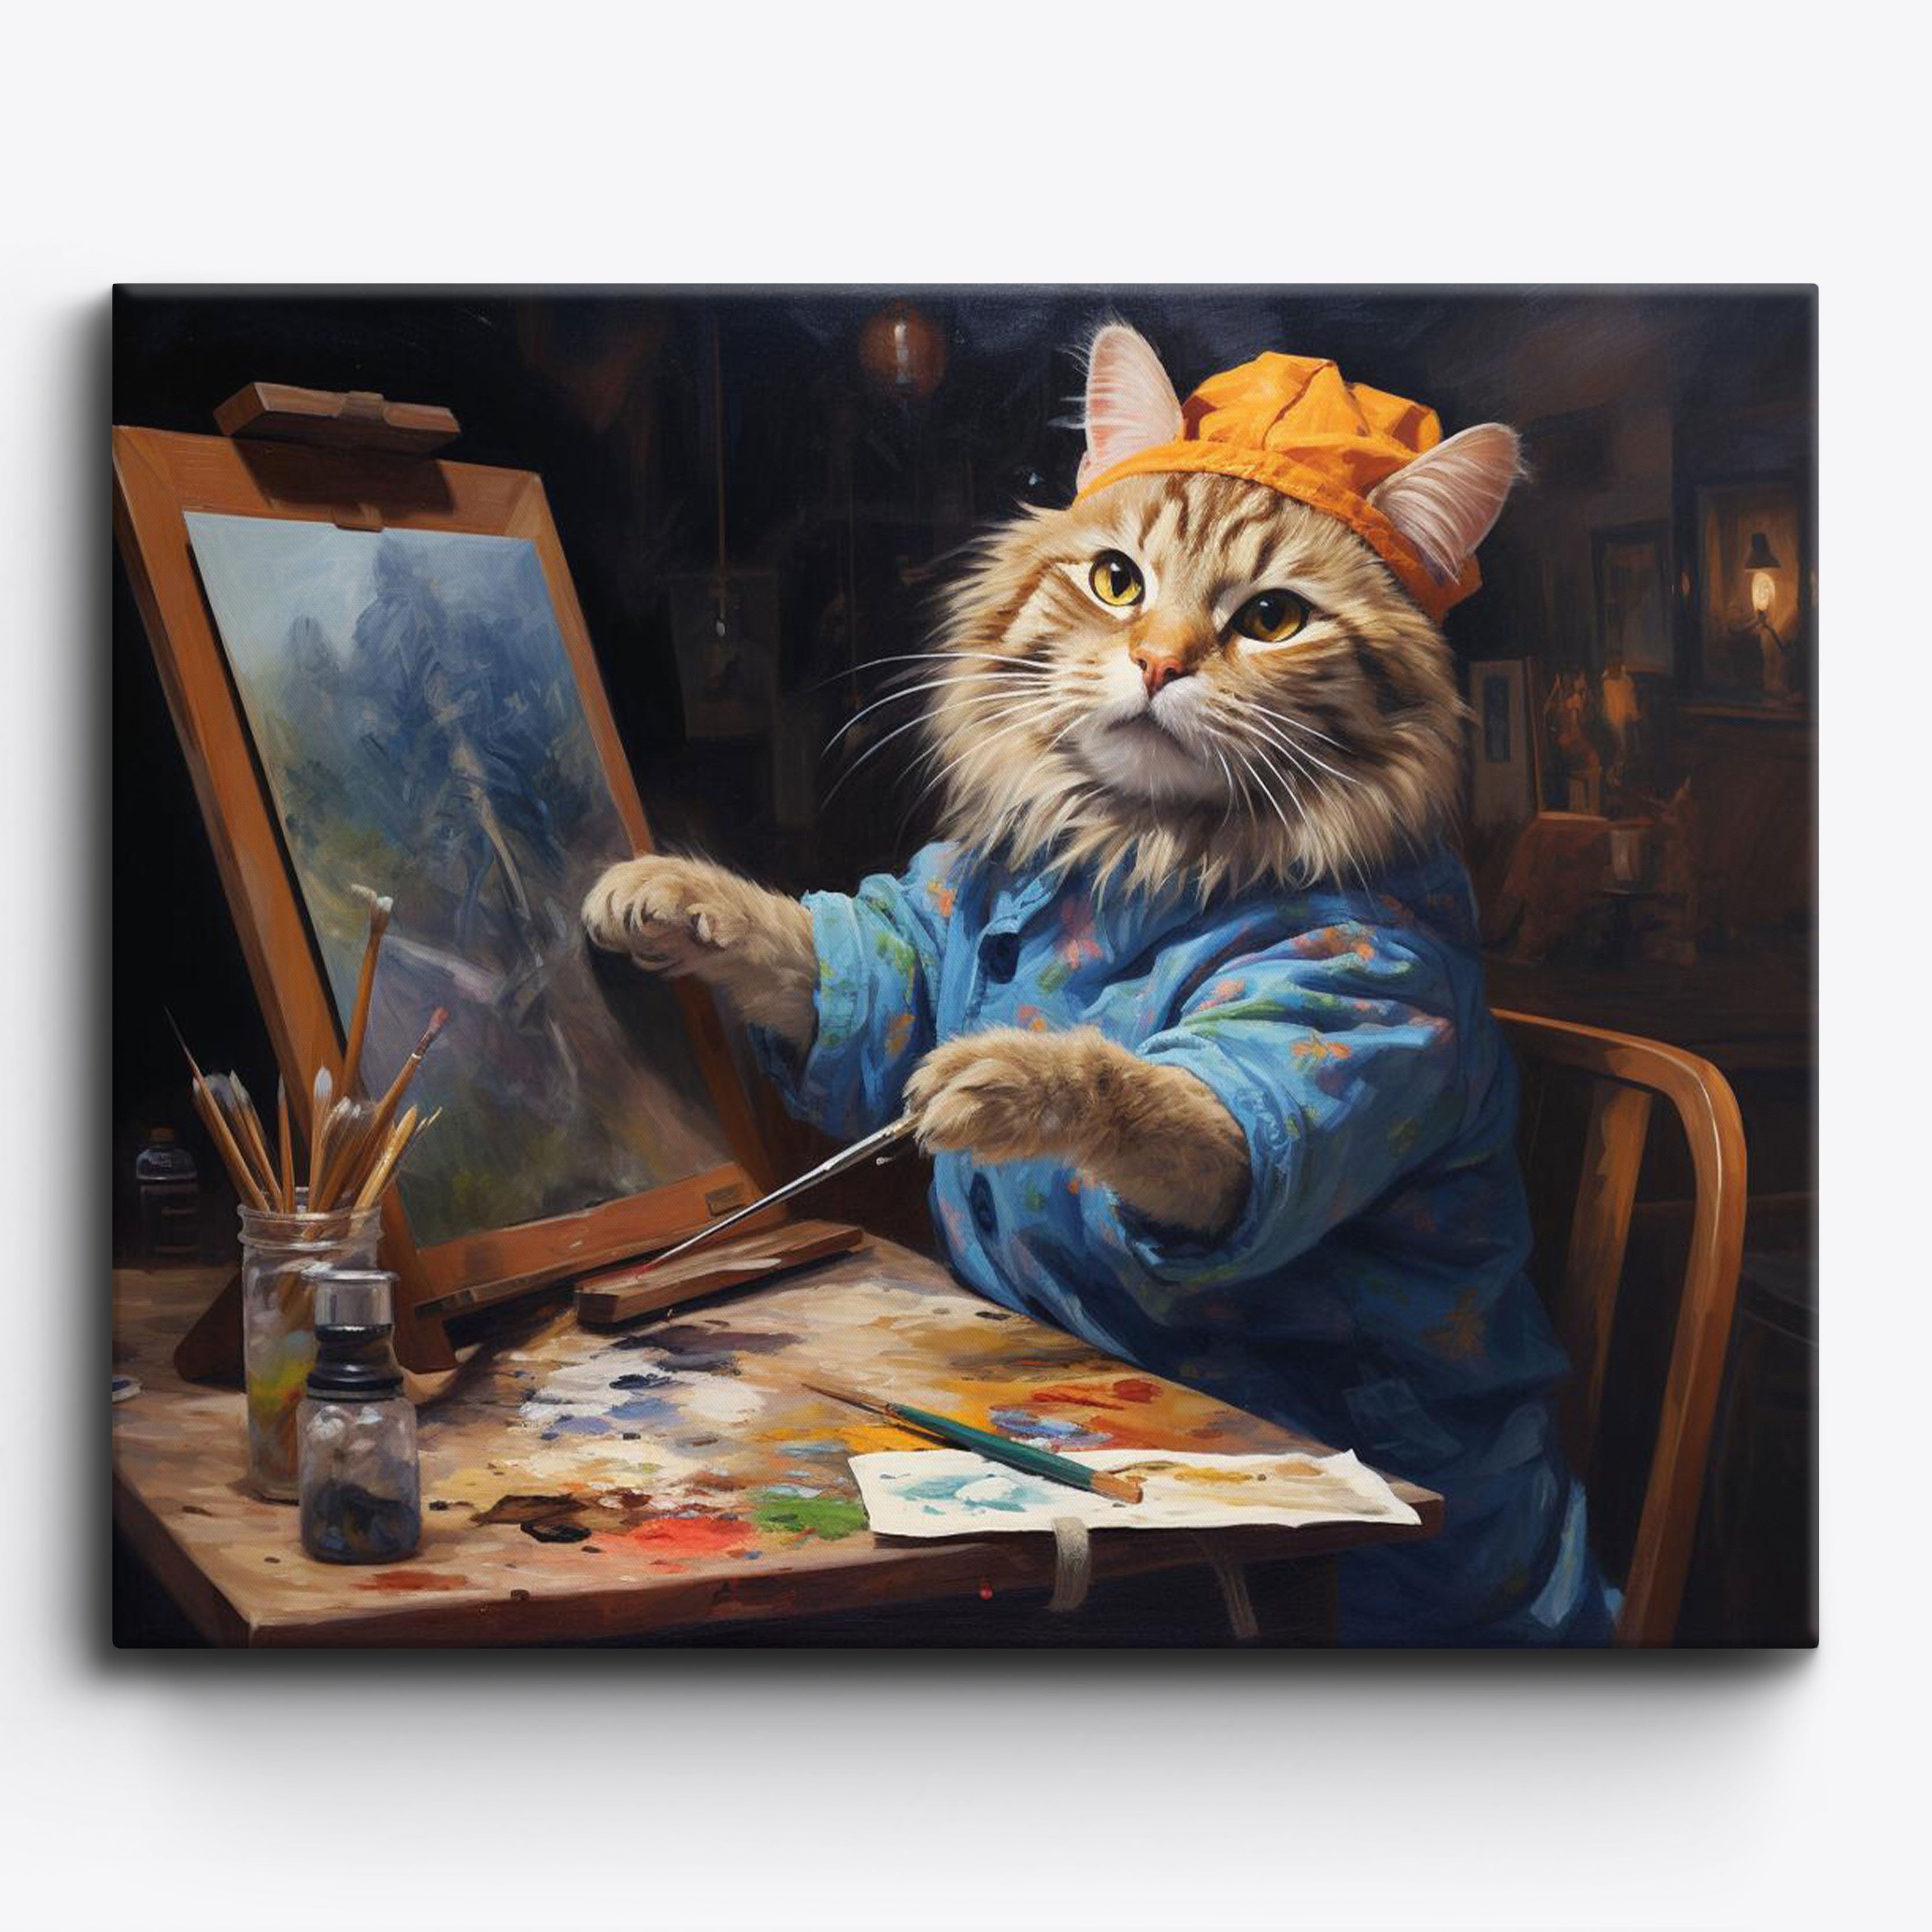 VIKMARI DIY Oil Painting Paint by Number Kit for Adults Colorful Cat Acrylic Painting by Numbers Kits for Kids Wall Art 16x20 inch (Without Frame)